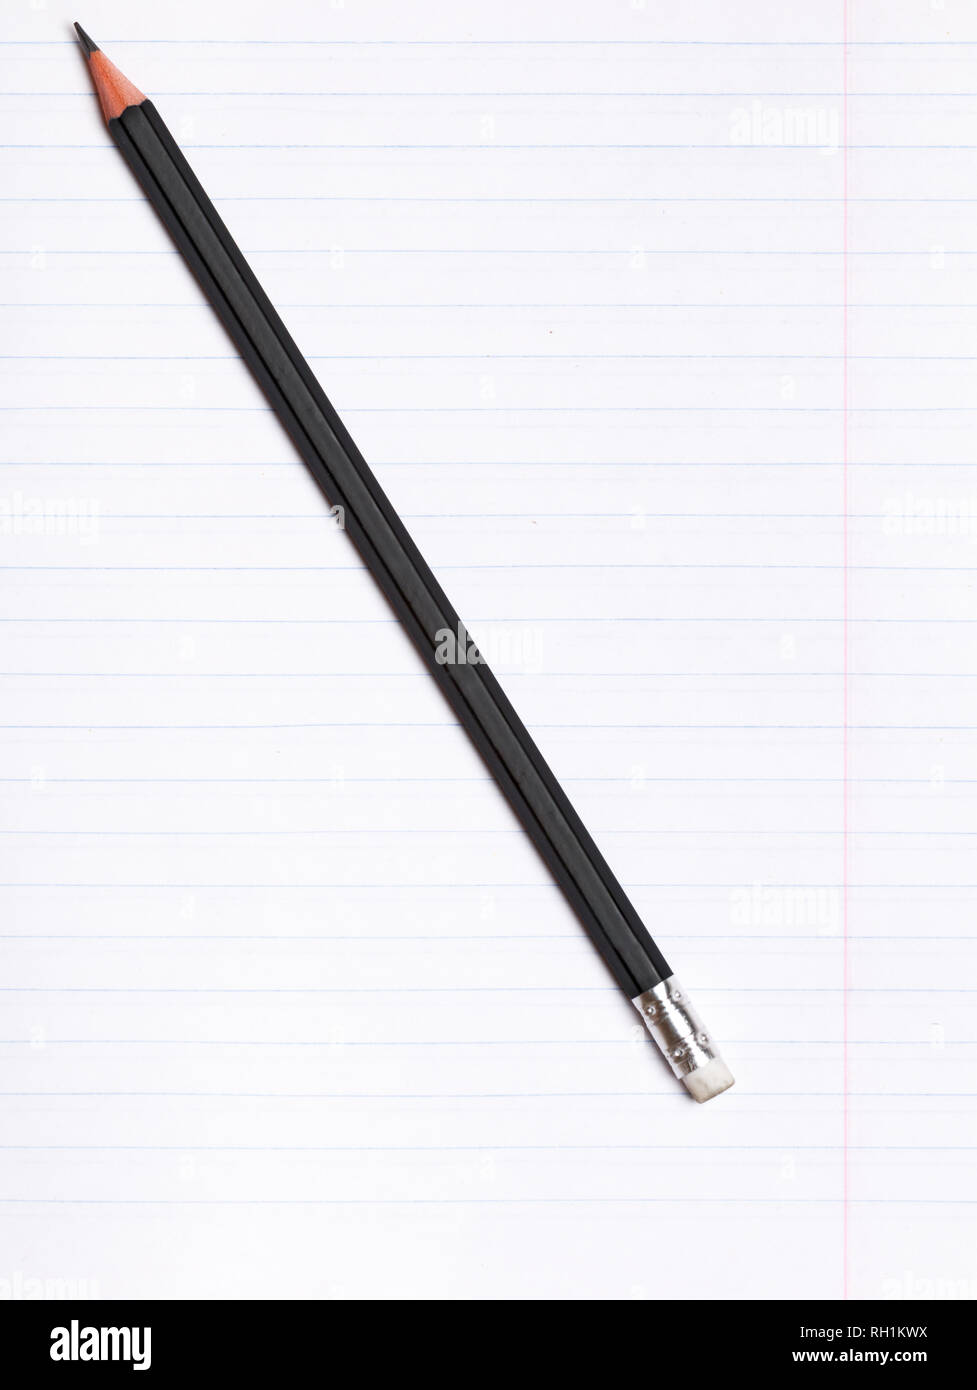 On a sheet of paper notebook with lines lies a black graphite pencil. Copy space. Education concept Stock Photo